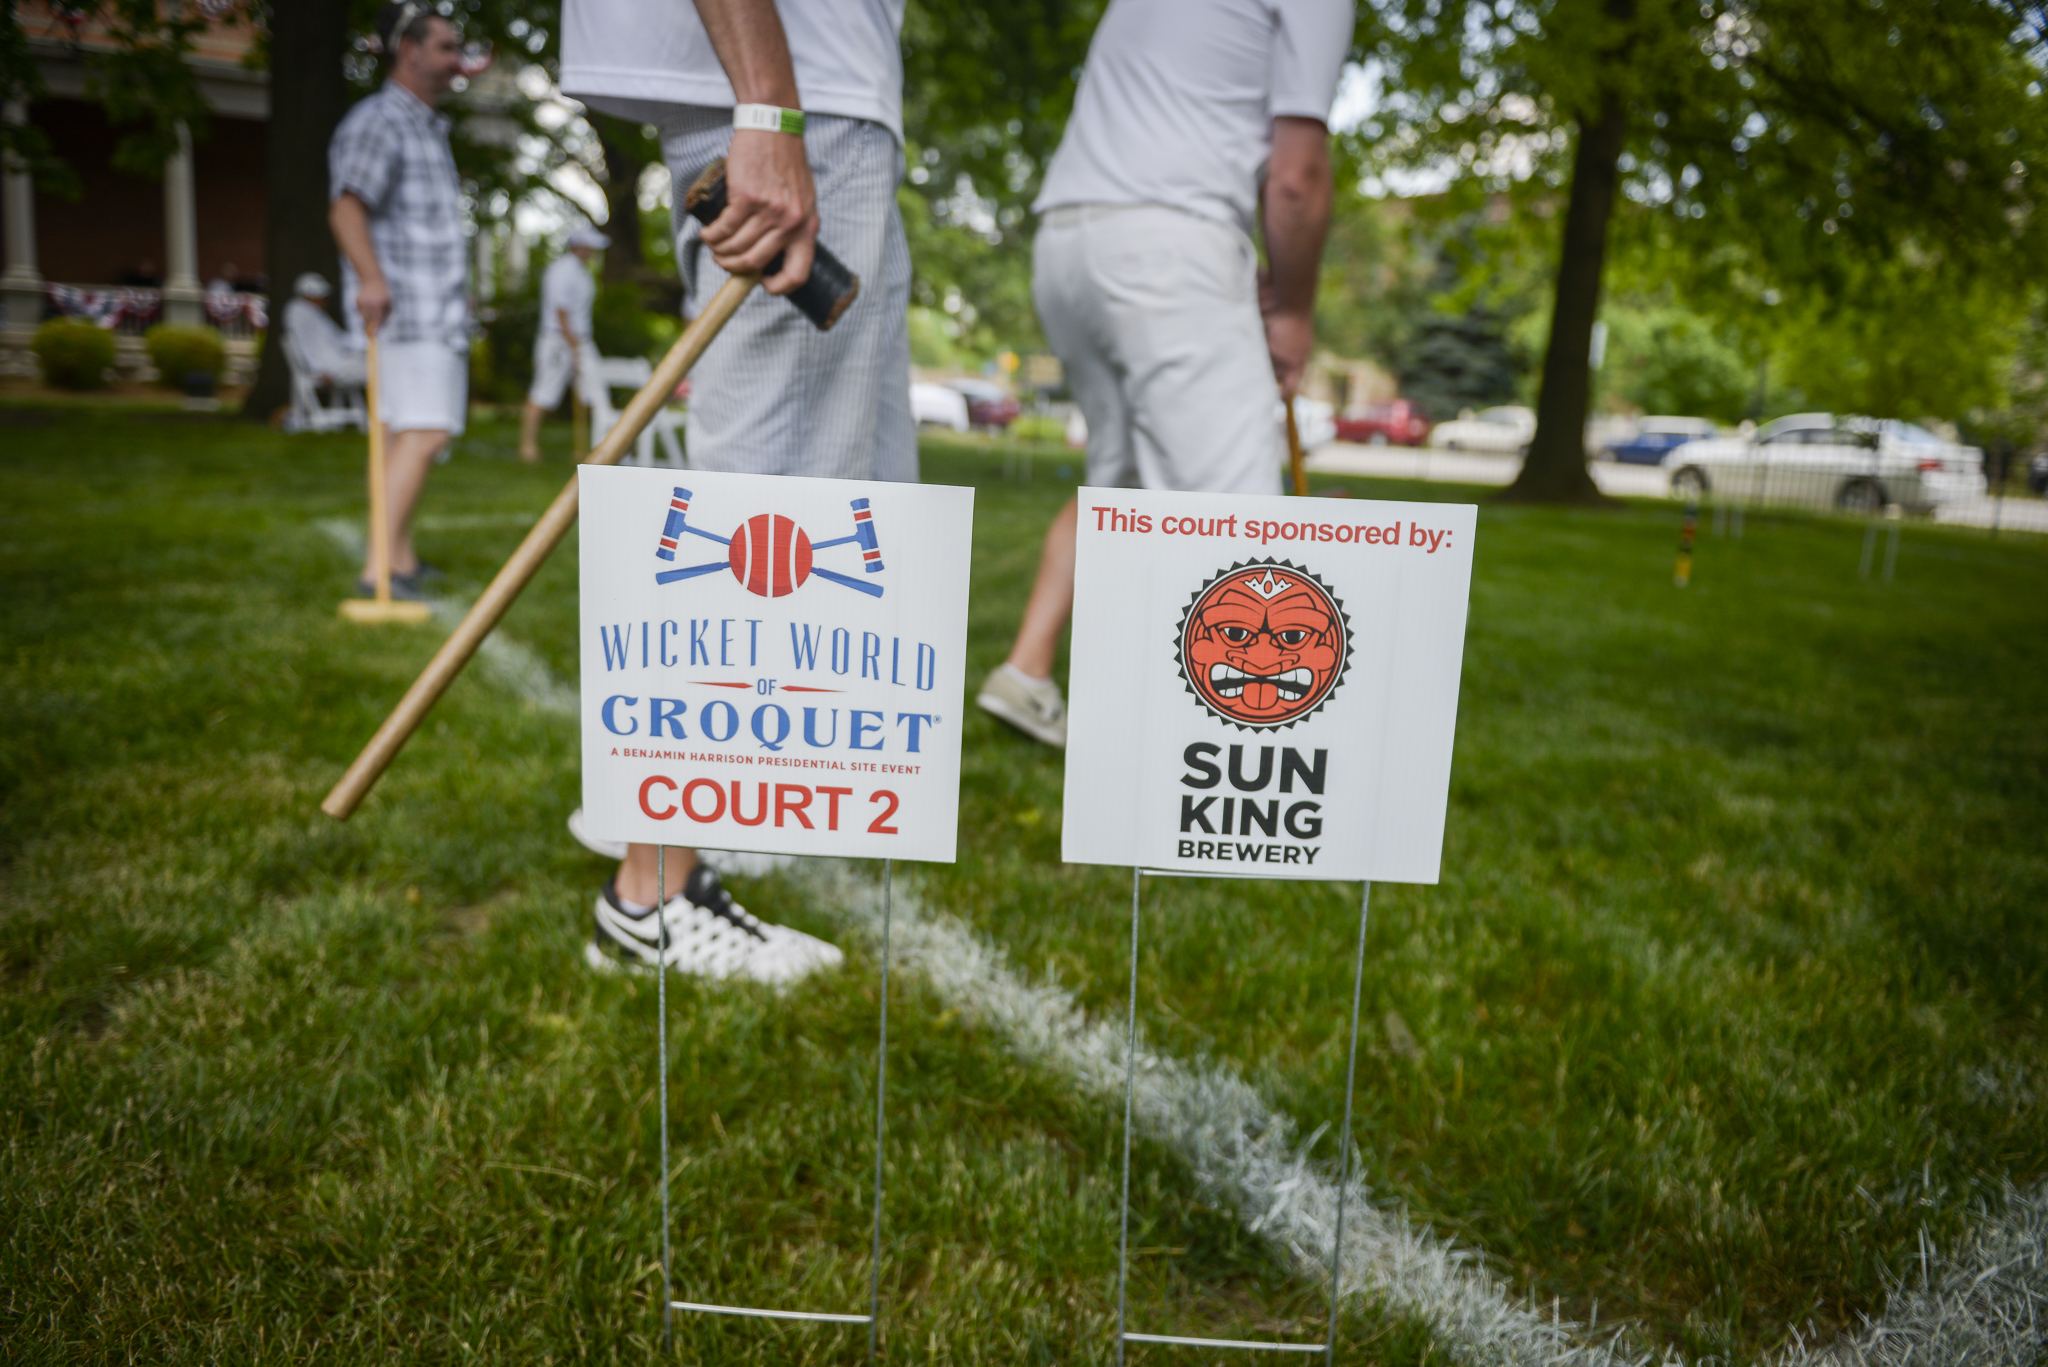 Photo of several men playing croquet. In the foreground, a man stands with his mallet in his hands while a man in front of him lines up a shot. A man in the background can be seen observing the game. In the very front are two signs, one sporting the wicket world of croquet logo, showing that this is court 2. the other sports the logo of sun king brewery, a sponsor of the benjamin harrison site.